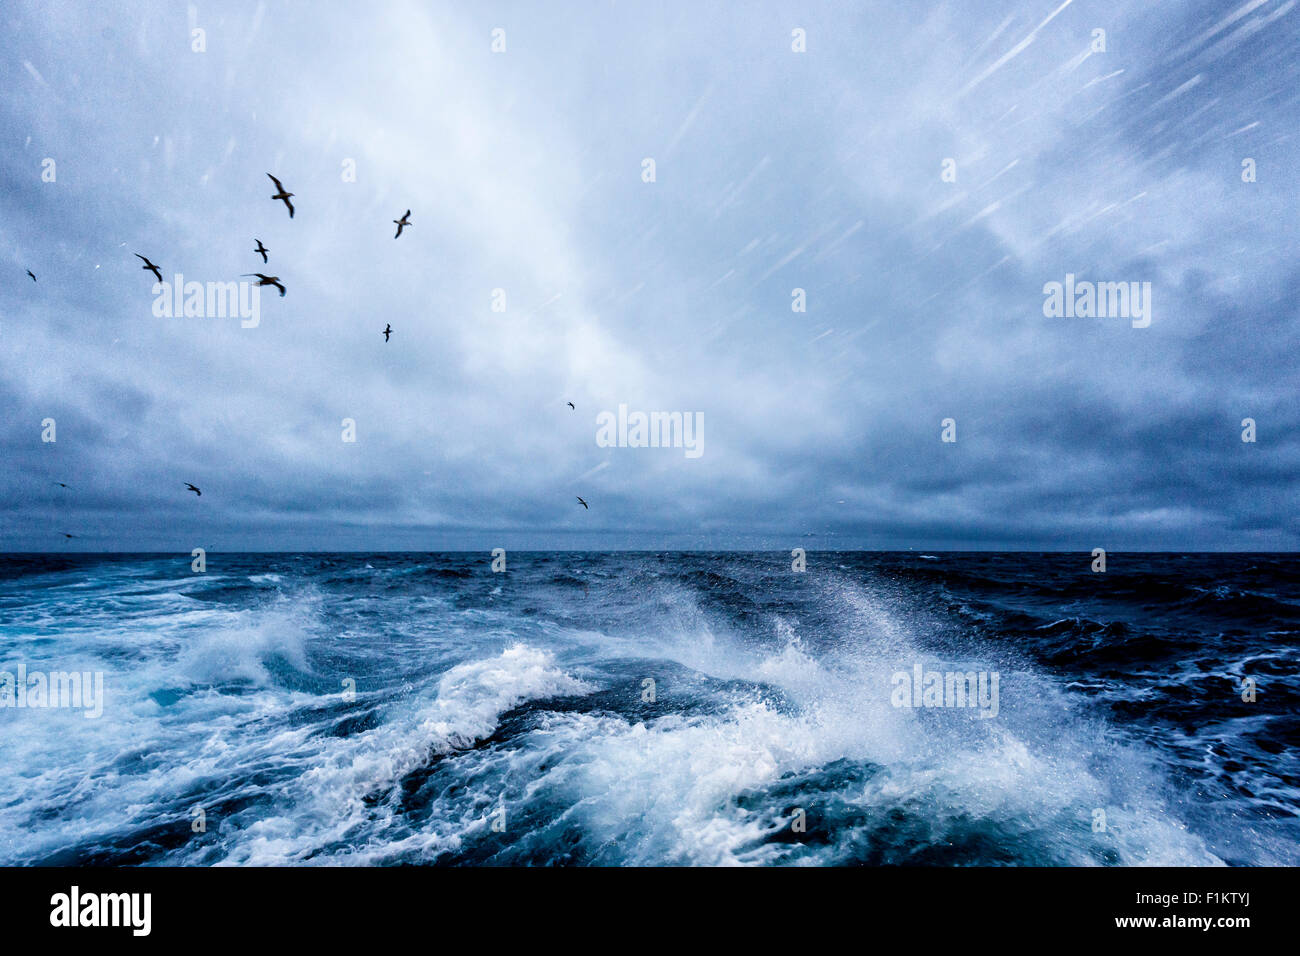 Windy conditions in the Drake Passage Stock Photo